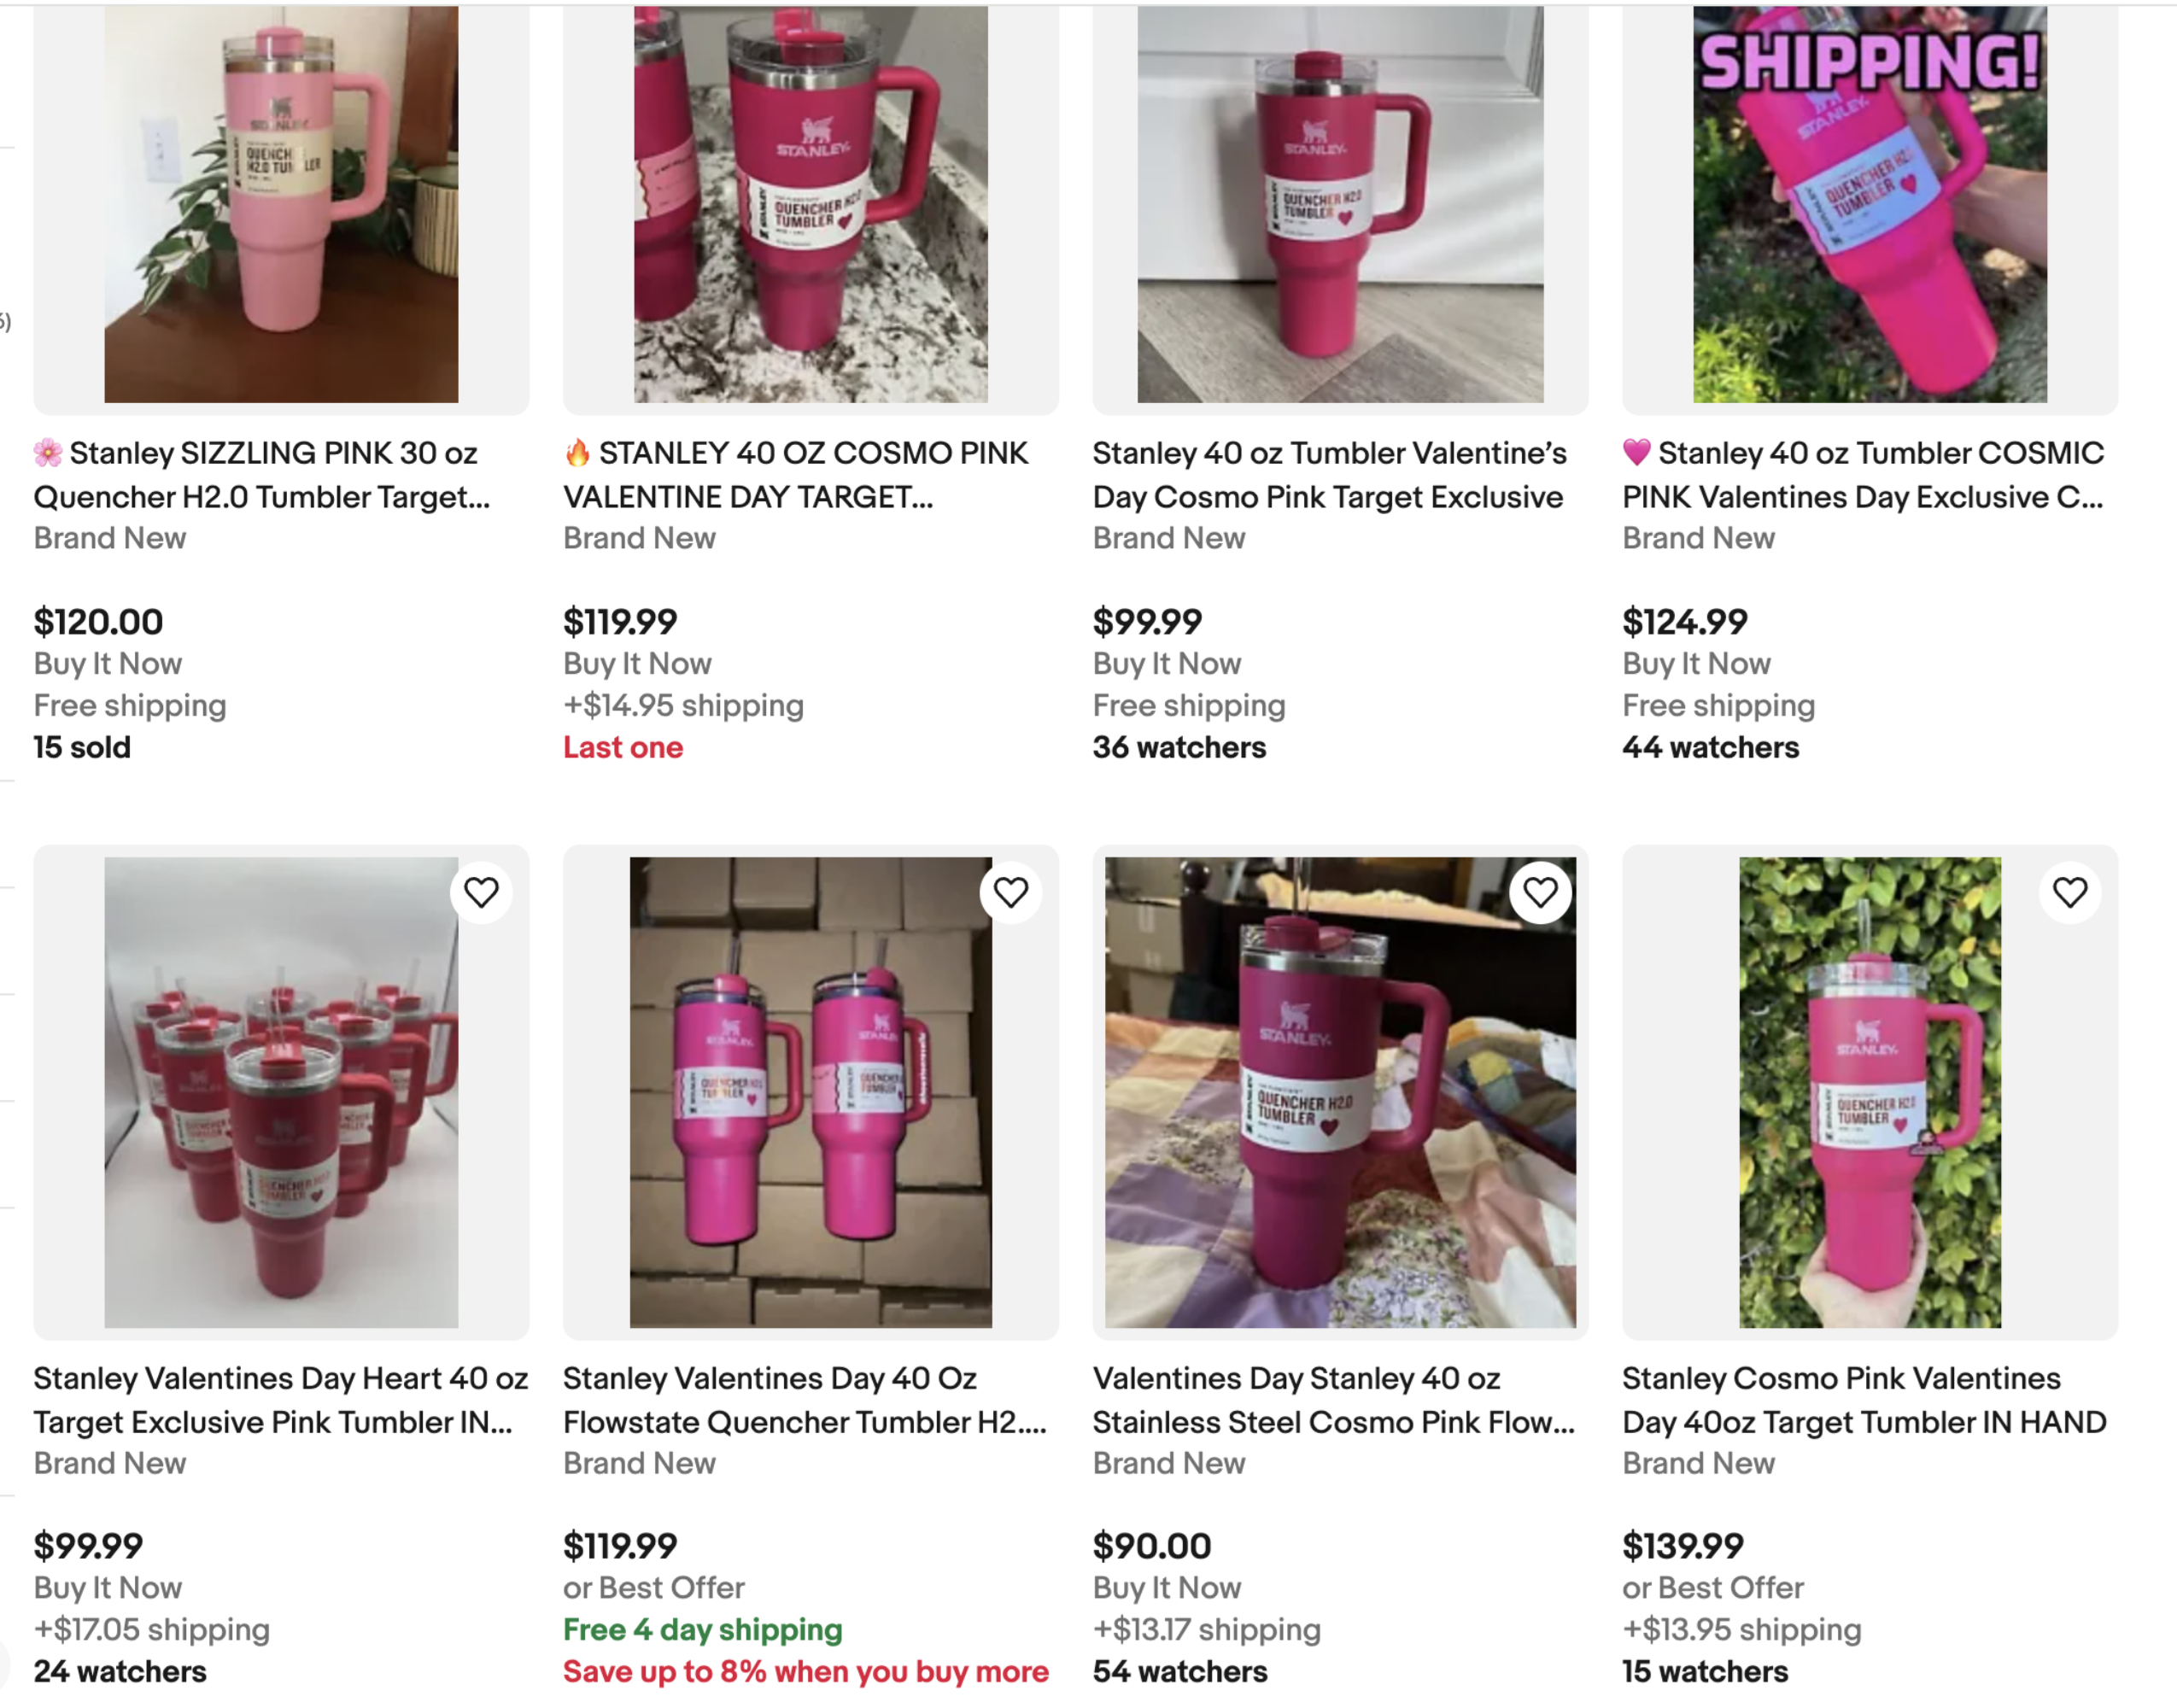 Screenshot of Stanley tumblers being sold on eBay, with prices ranging from $100 to $140